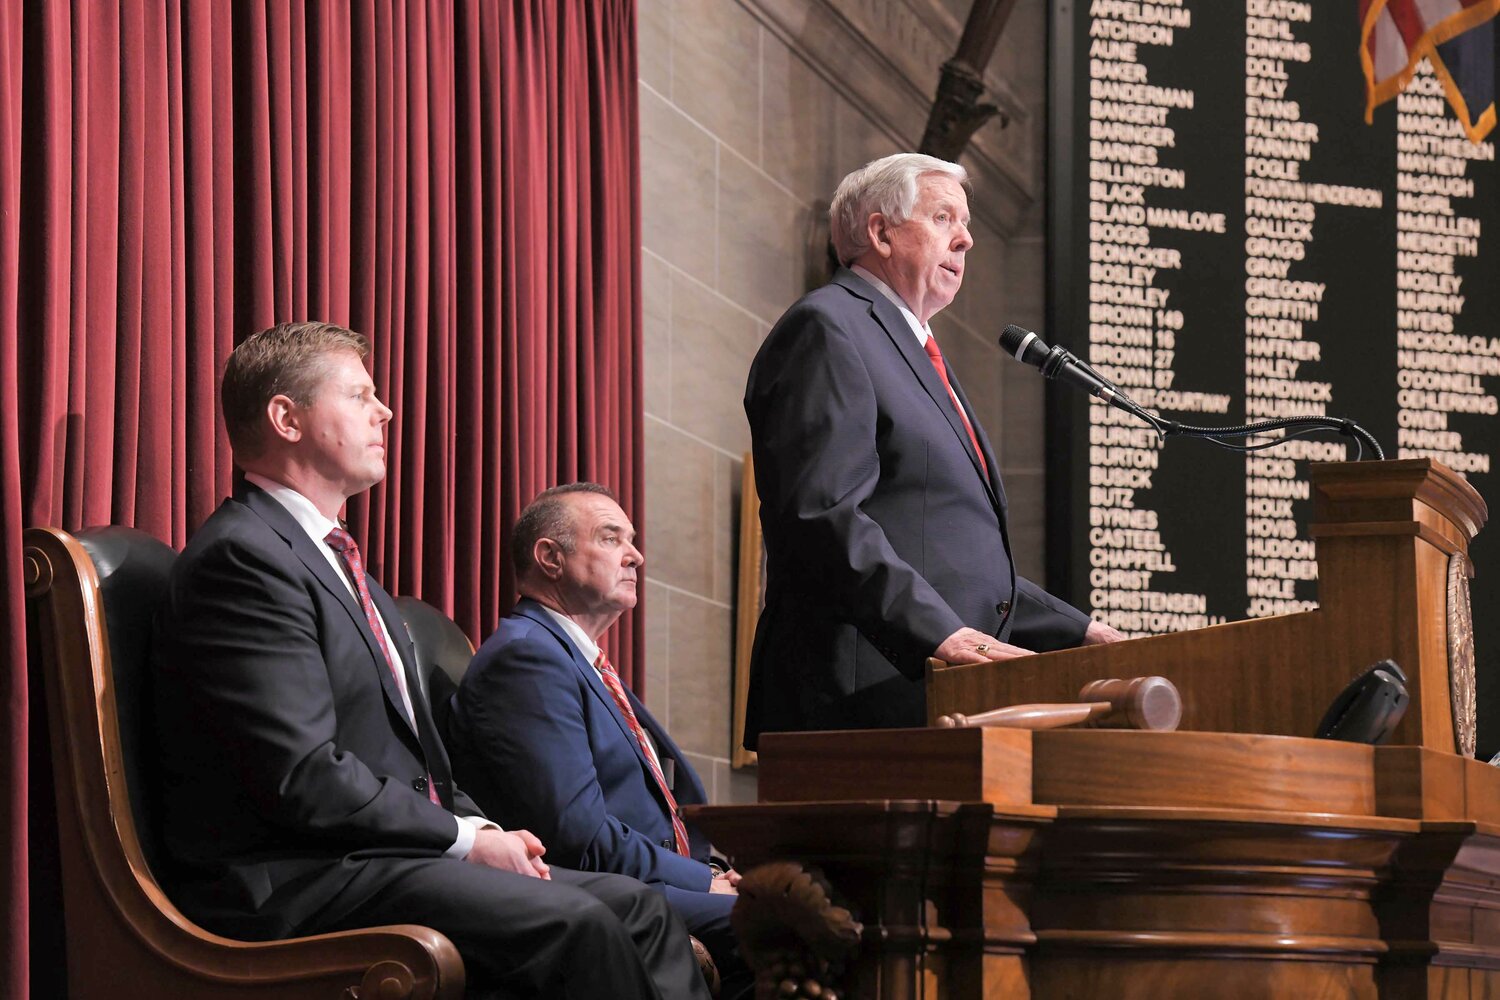 Gov. Mike Parson delivers his final State of the State address as governor.